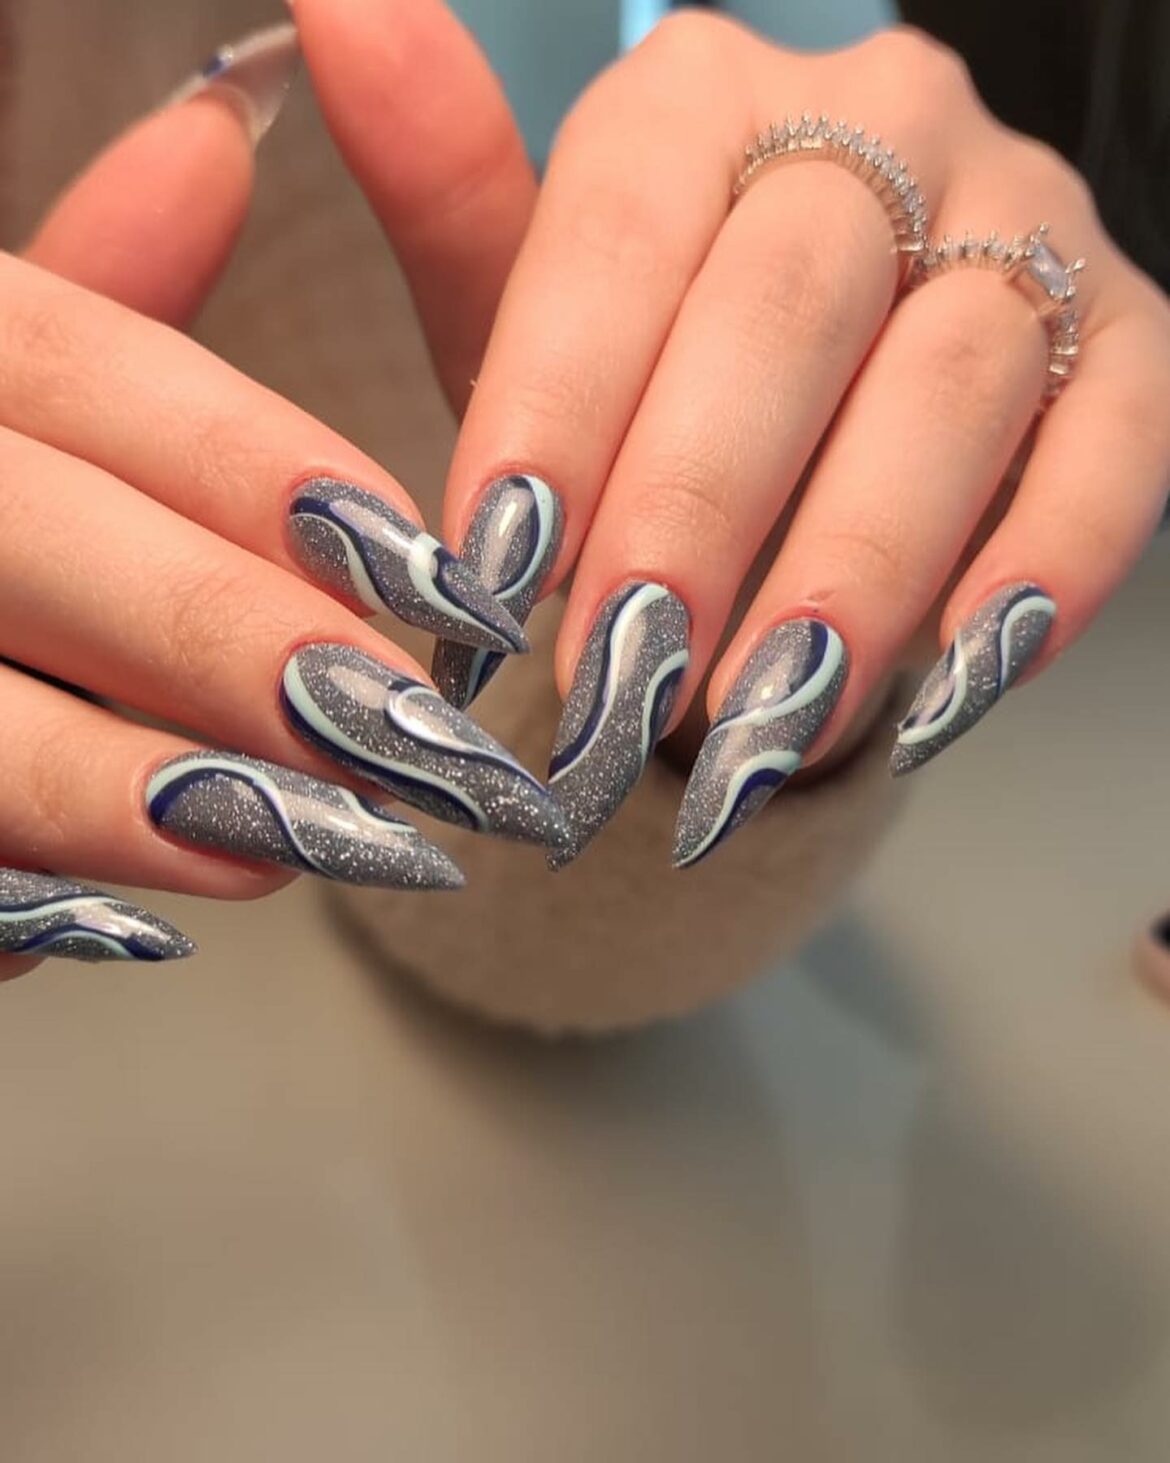 Chic Silver Nails 1170x1463 